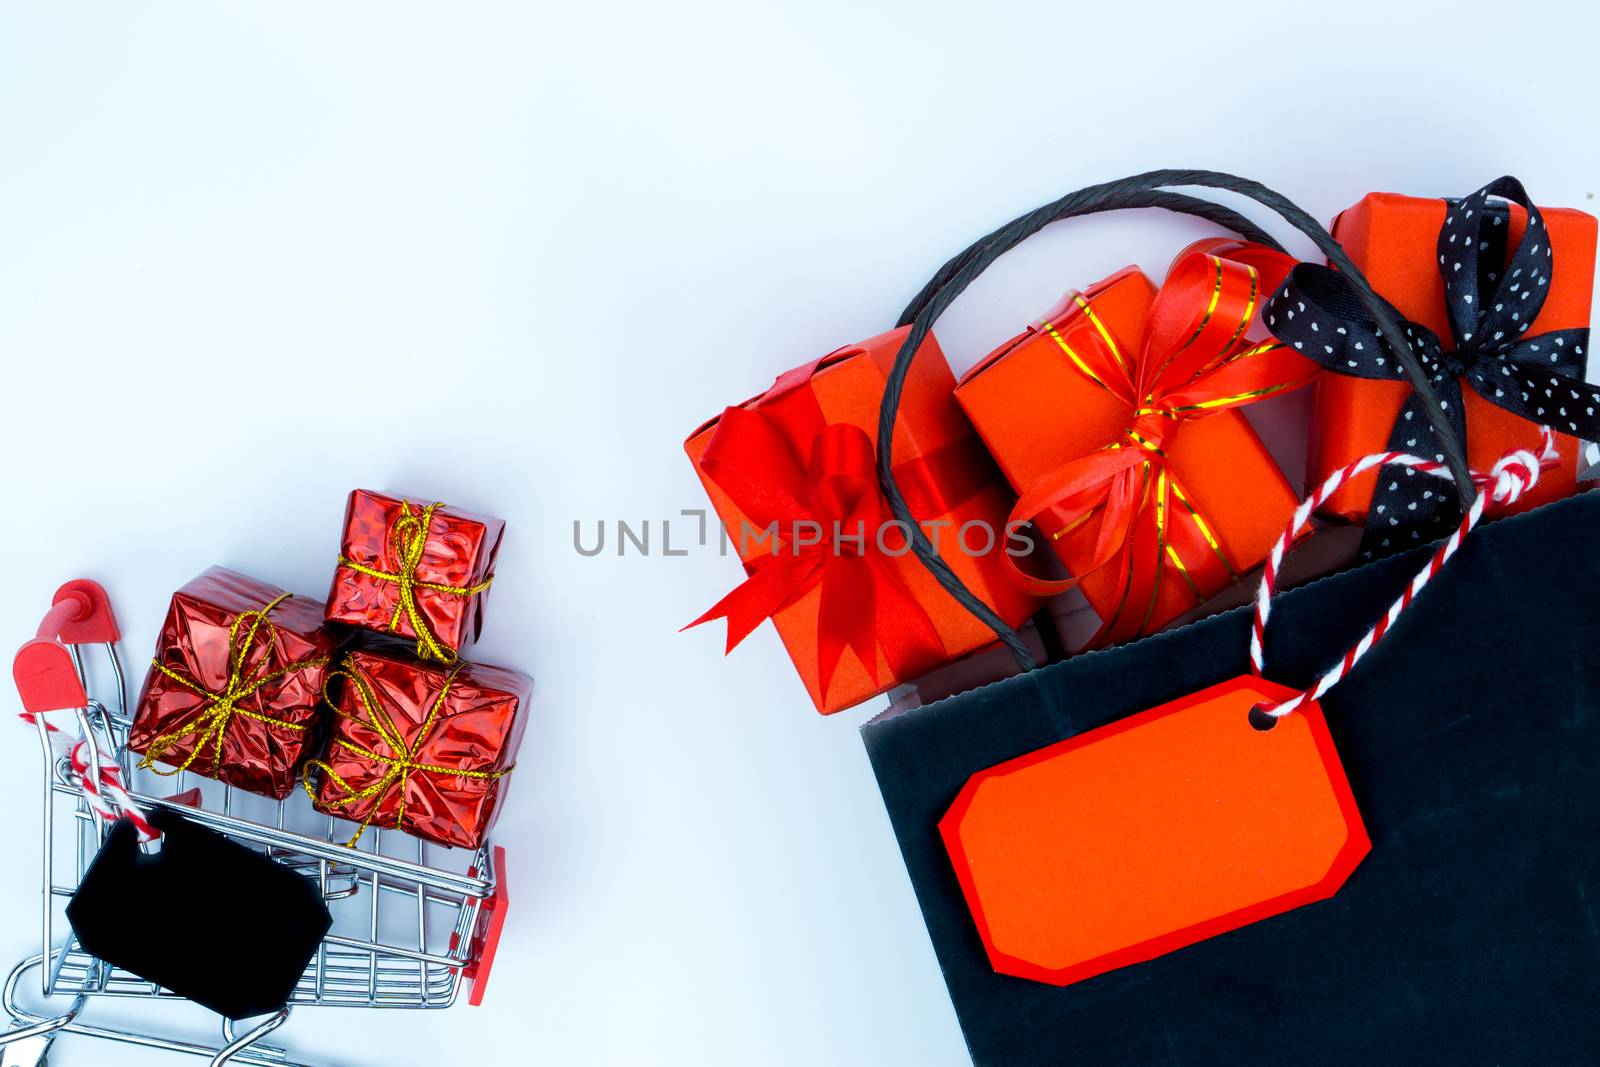 Online shopping of China, The shopping cart and Christmas boxes with red ribbon on a white background with copy space for text. 11.11 single's day sale concept